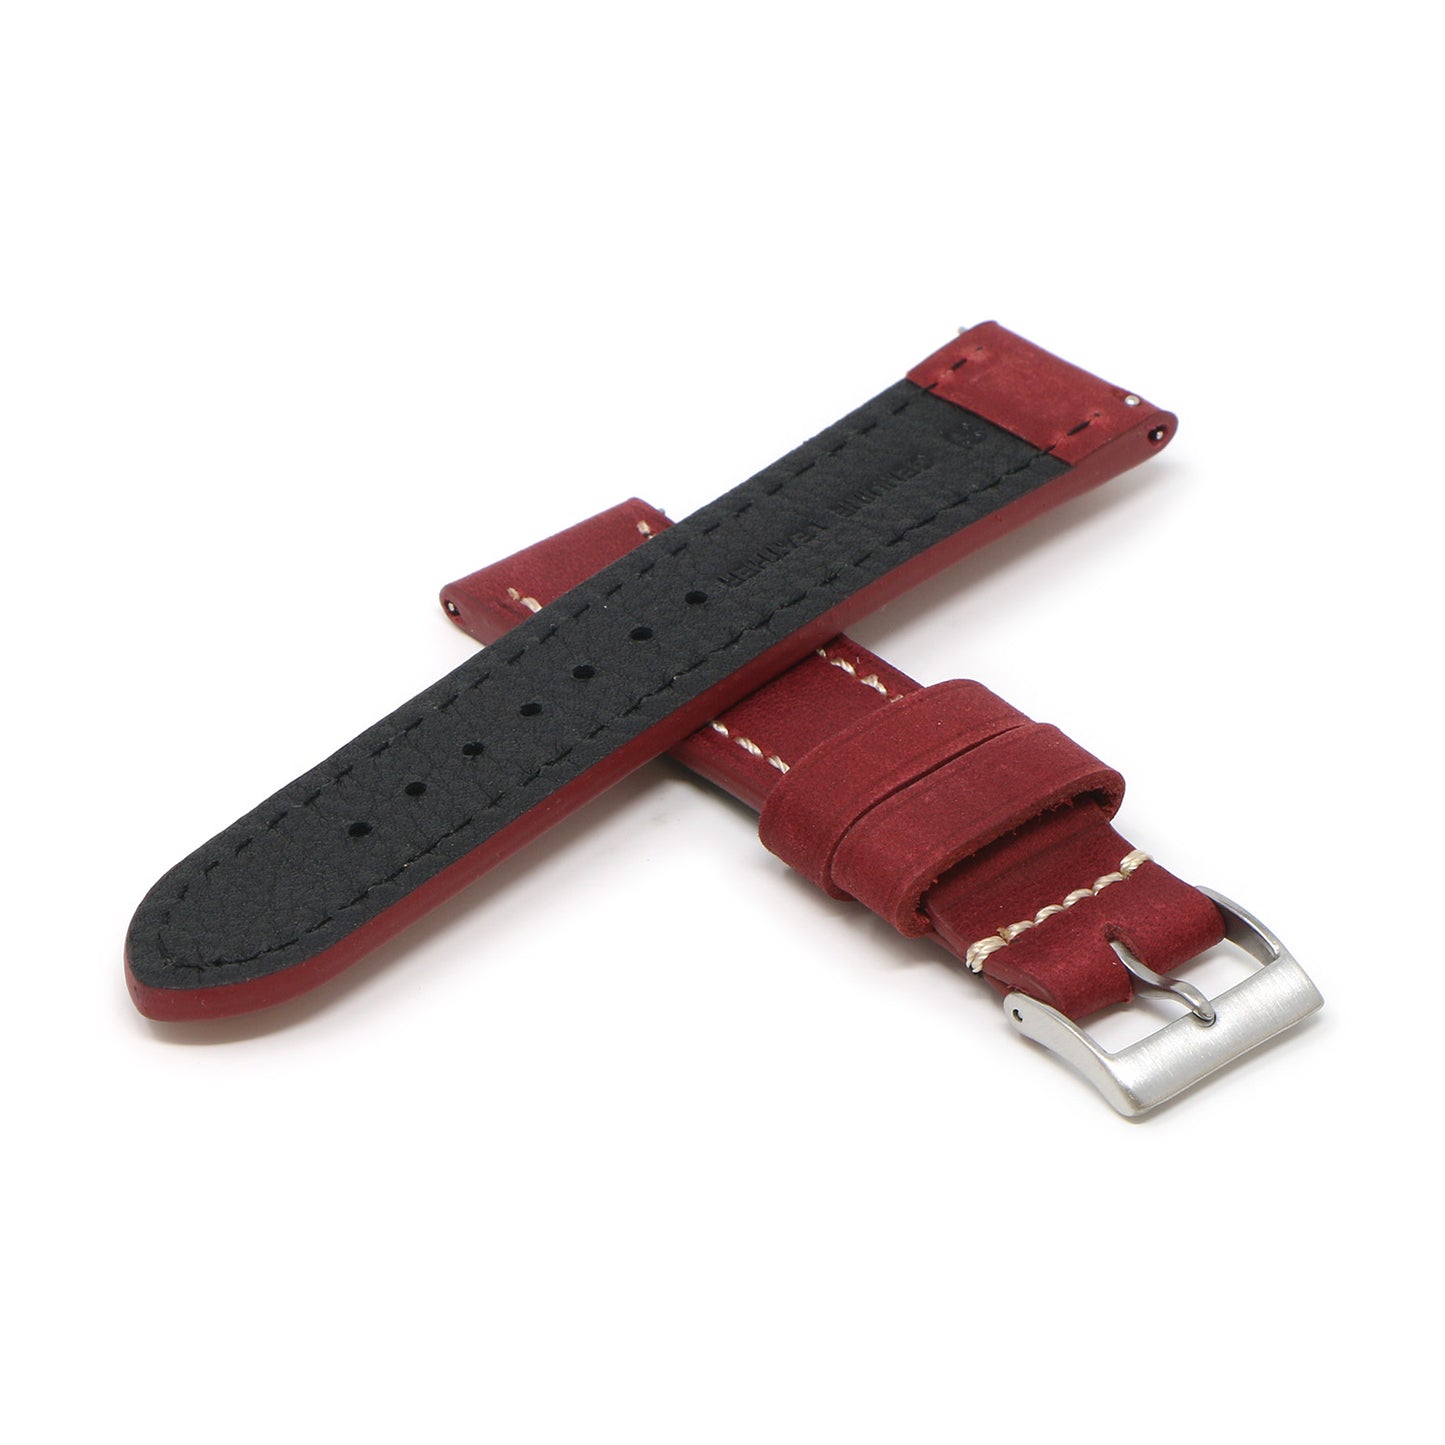 Vintage Leather Strap (Short, Standard, Extra Long) for Apple Watch